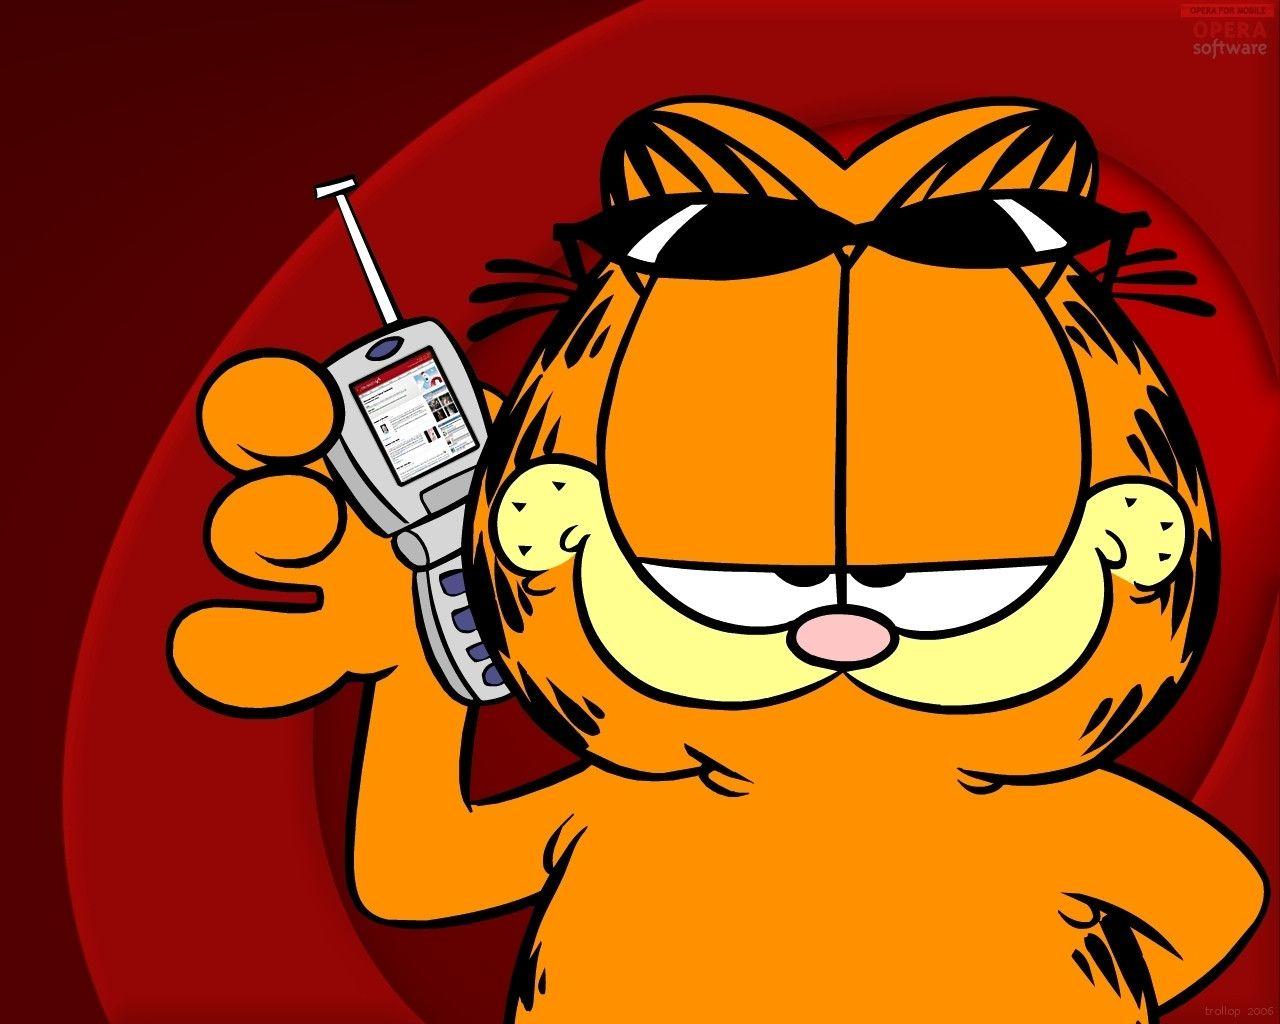 Funny Garfield Wallpapers Wallpaper Cave